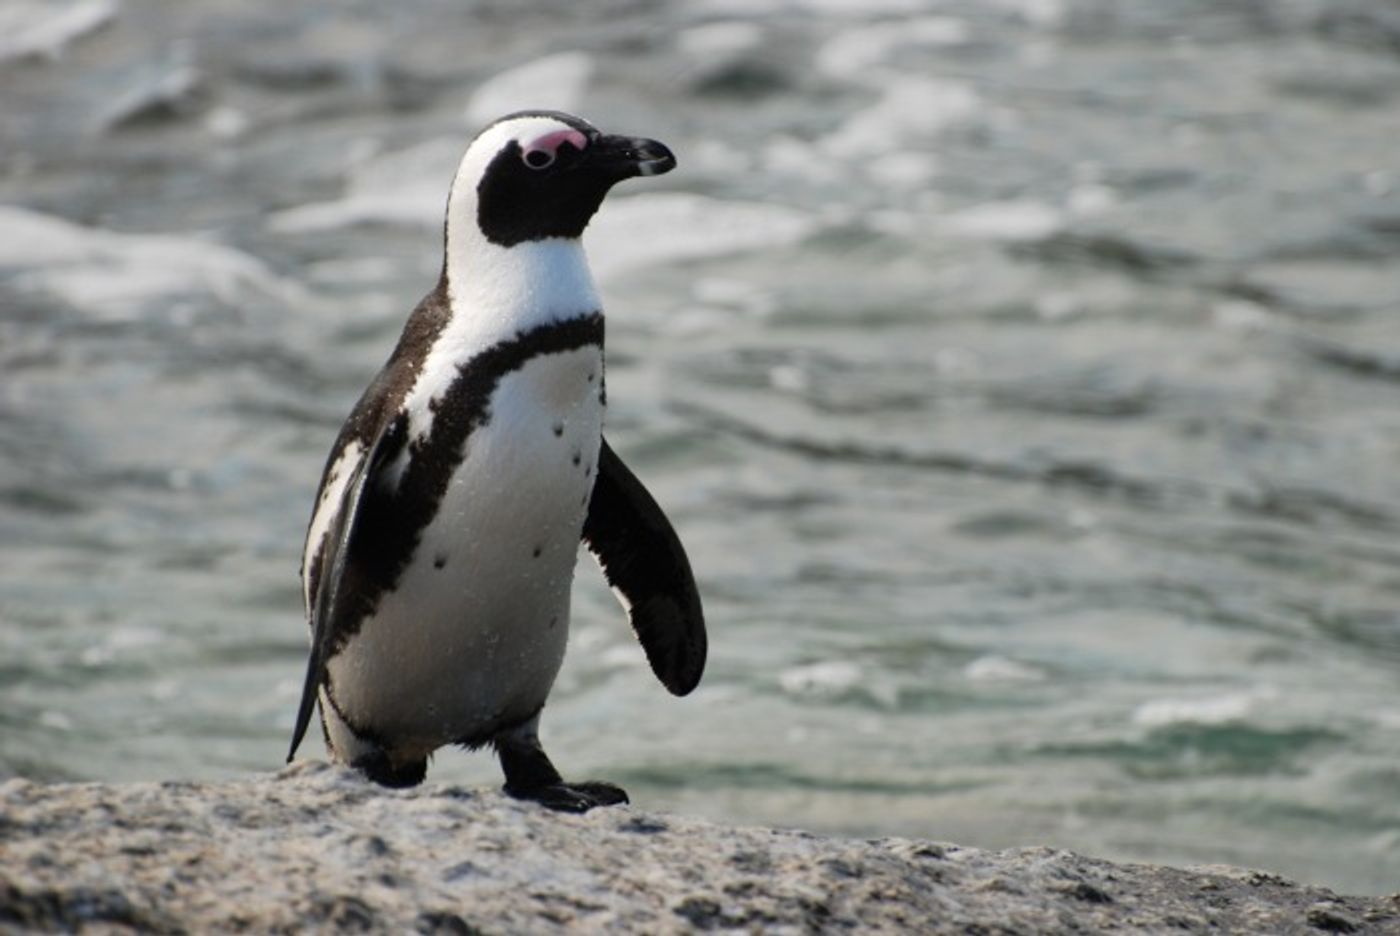 The African black-footed penguin is close to making the endangered species list, and now one that was used to pampering from humans will have to fight for its life in the wild.